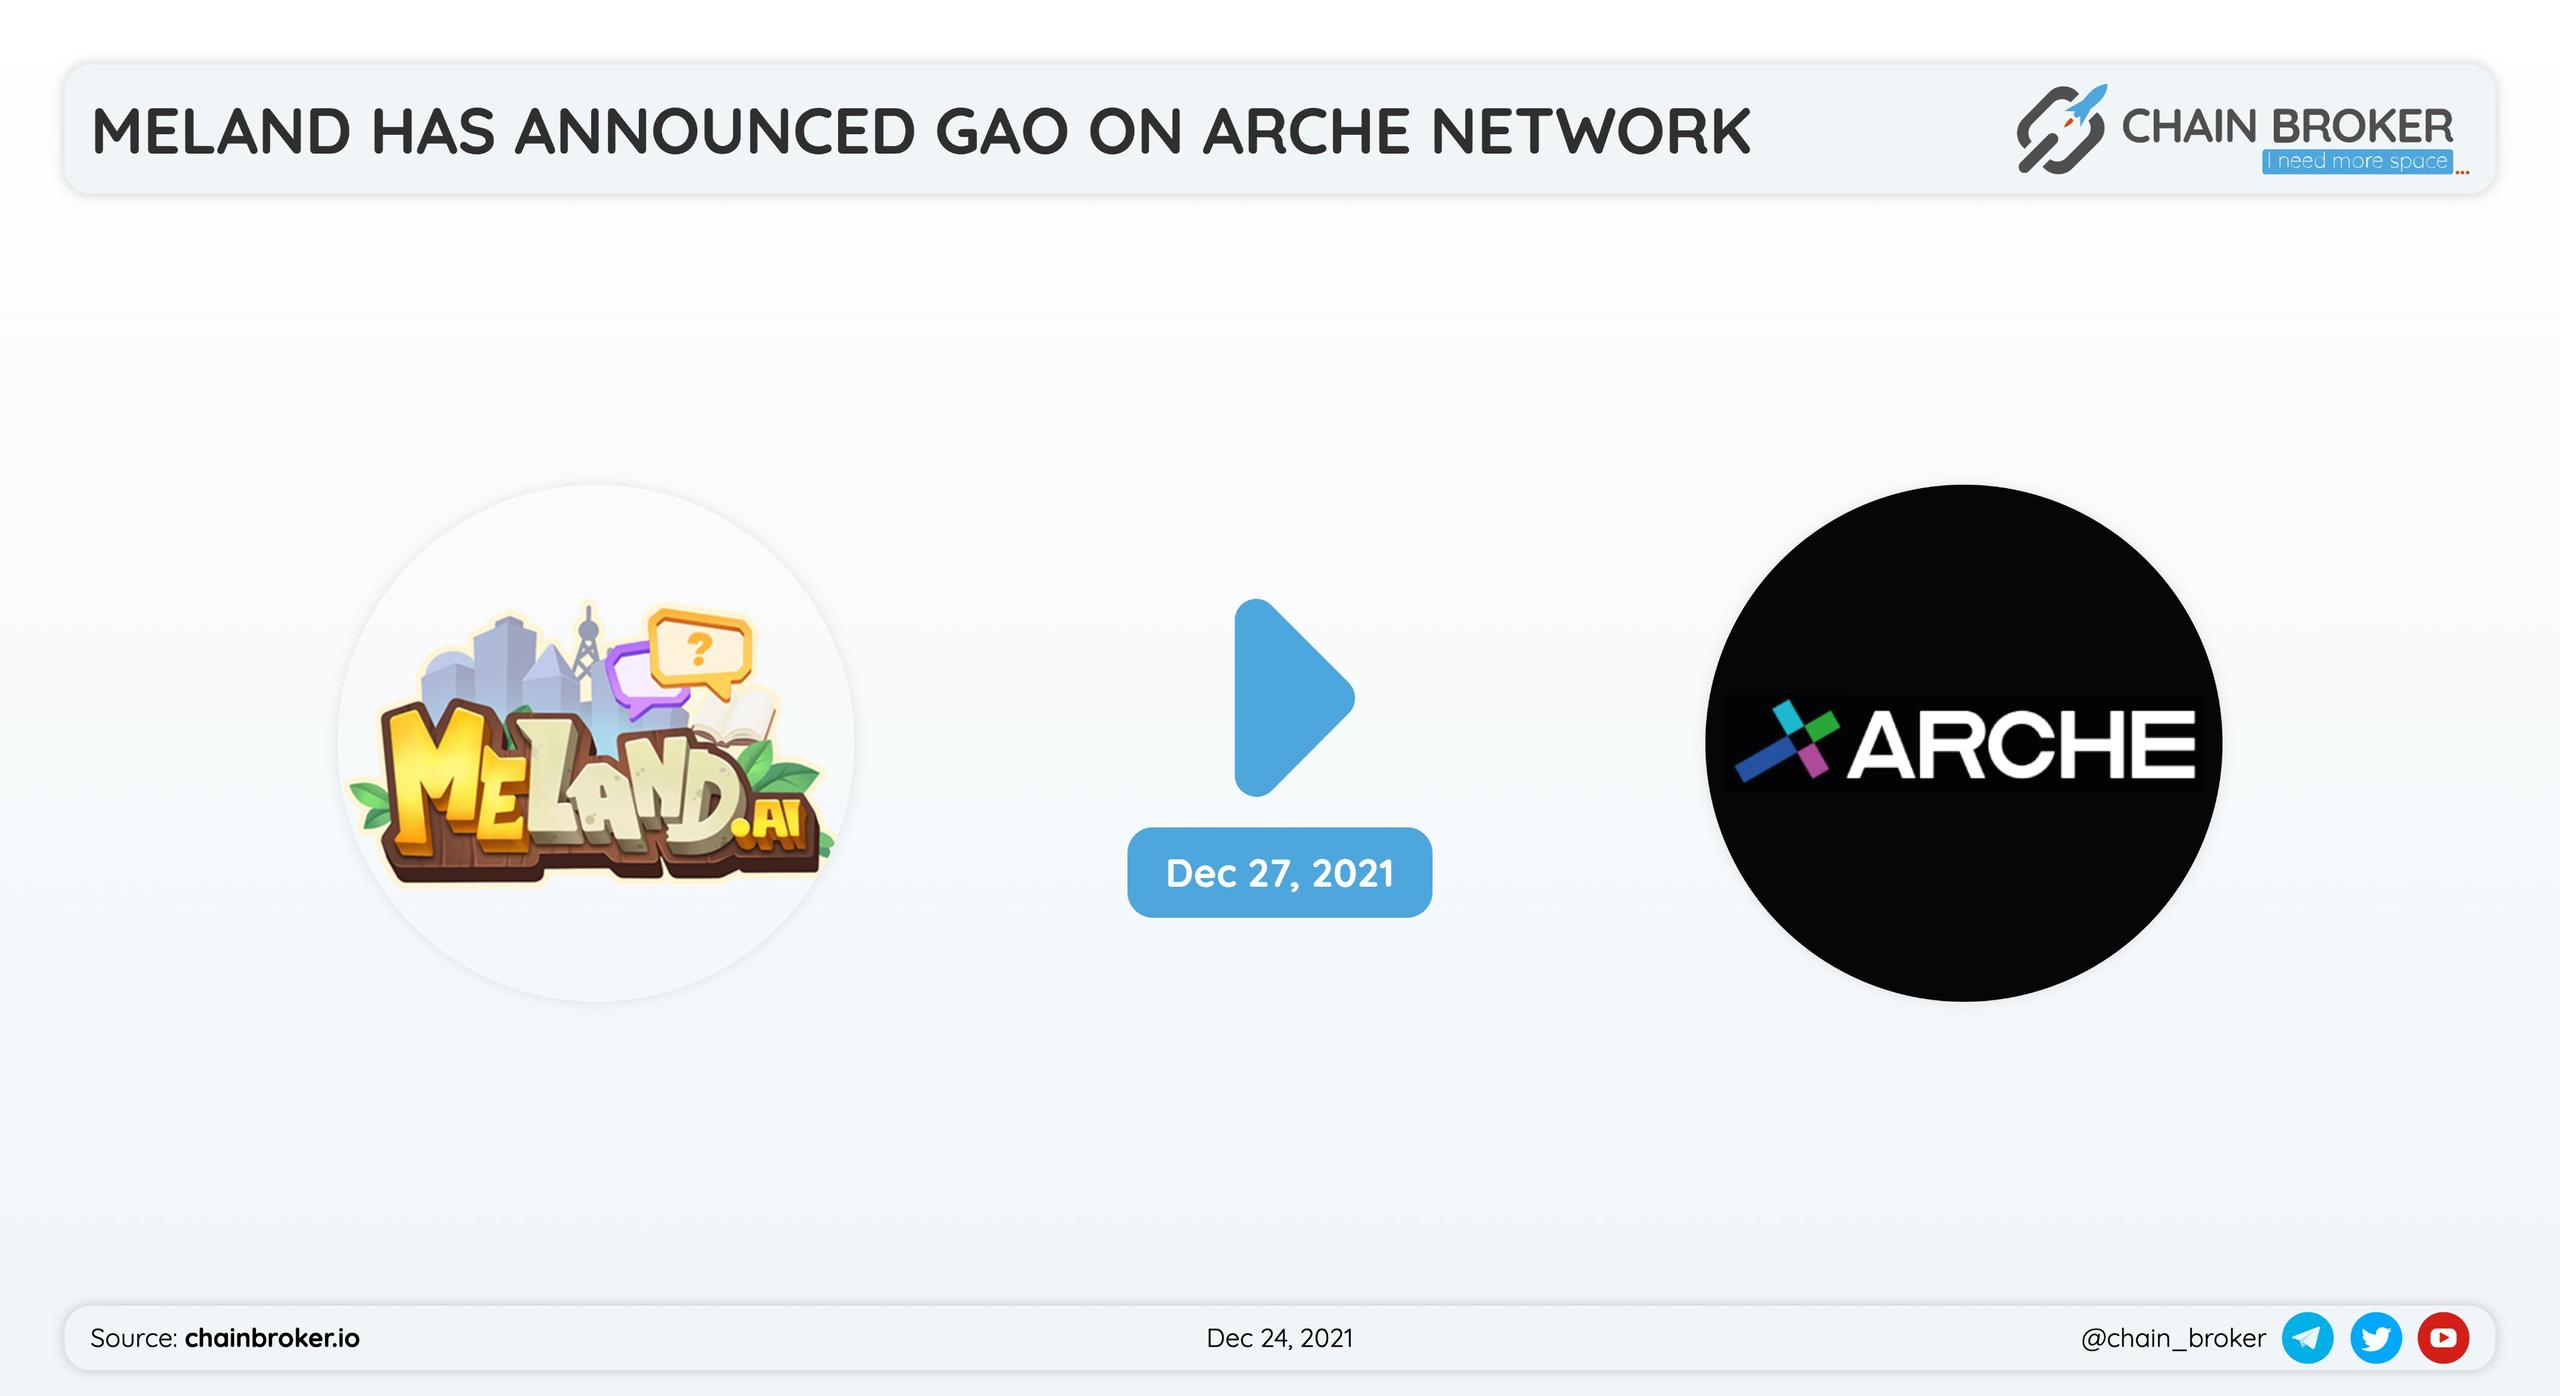 Meland will conduct a GAO (Game Assets Offering) on Arche Network.